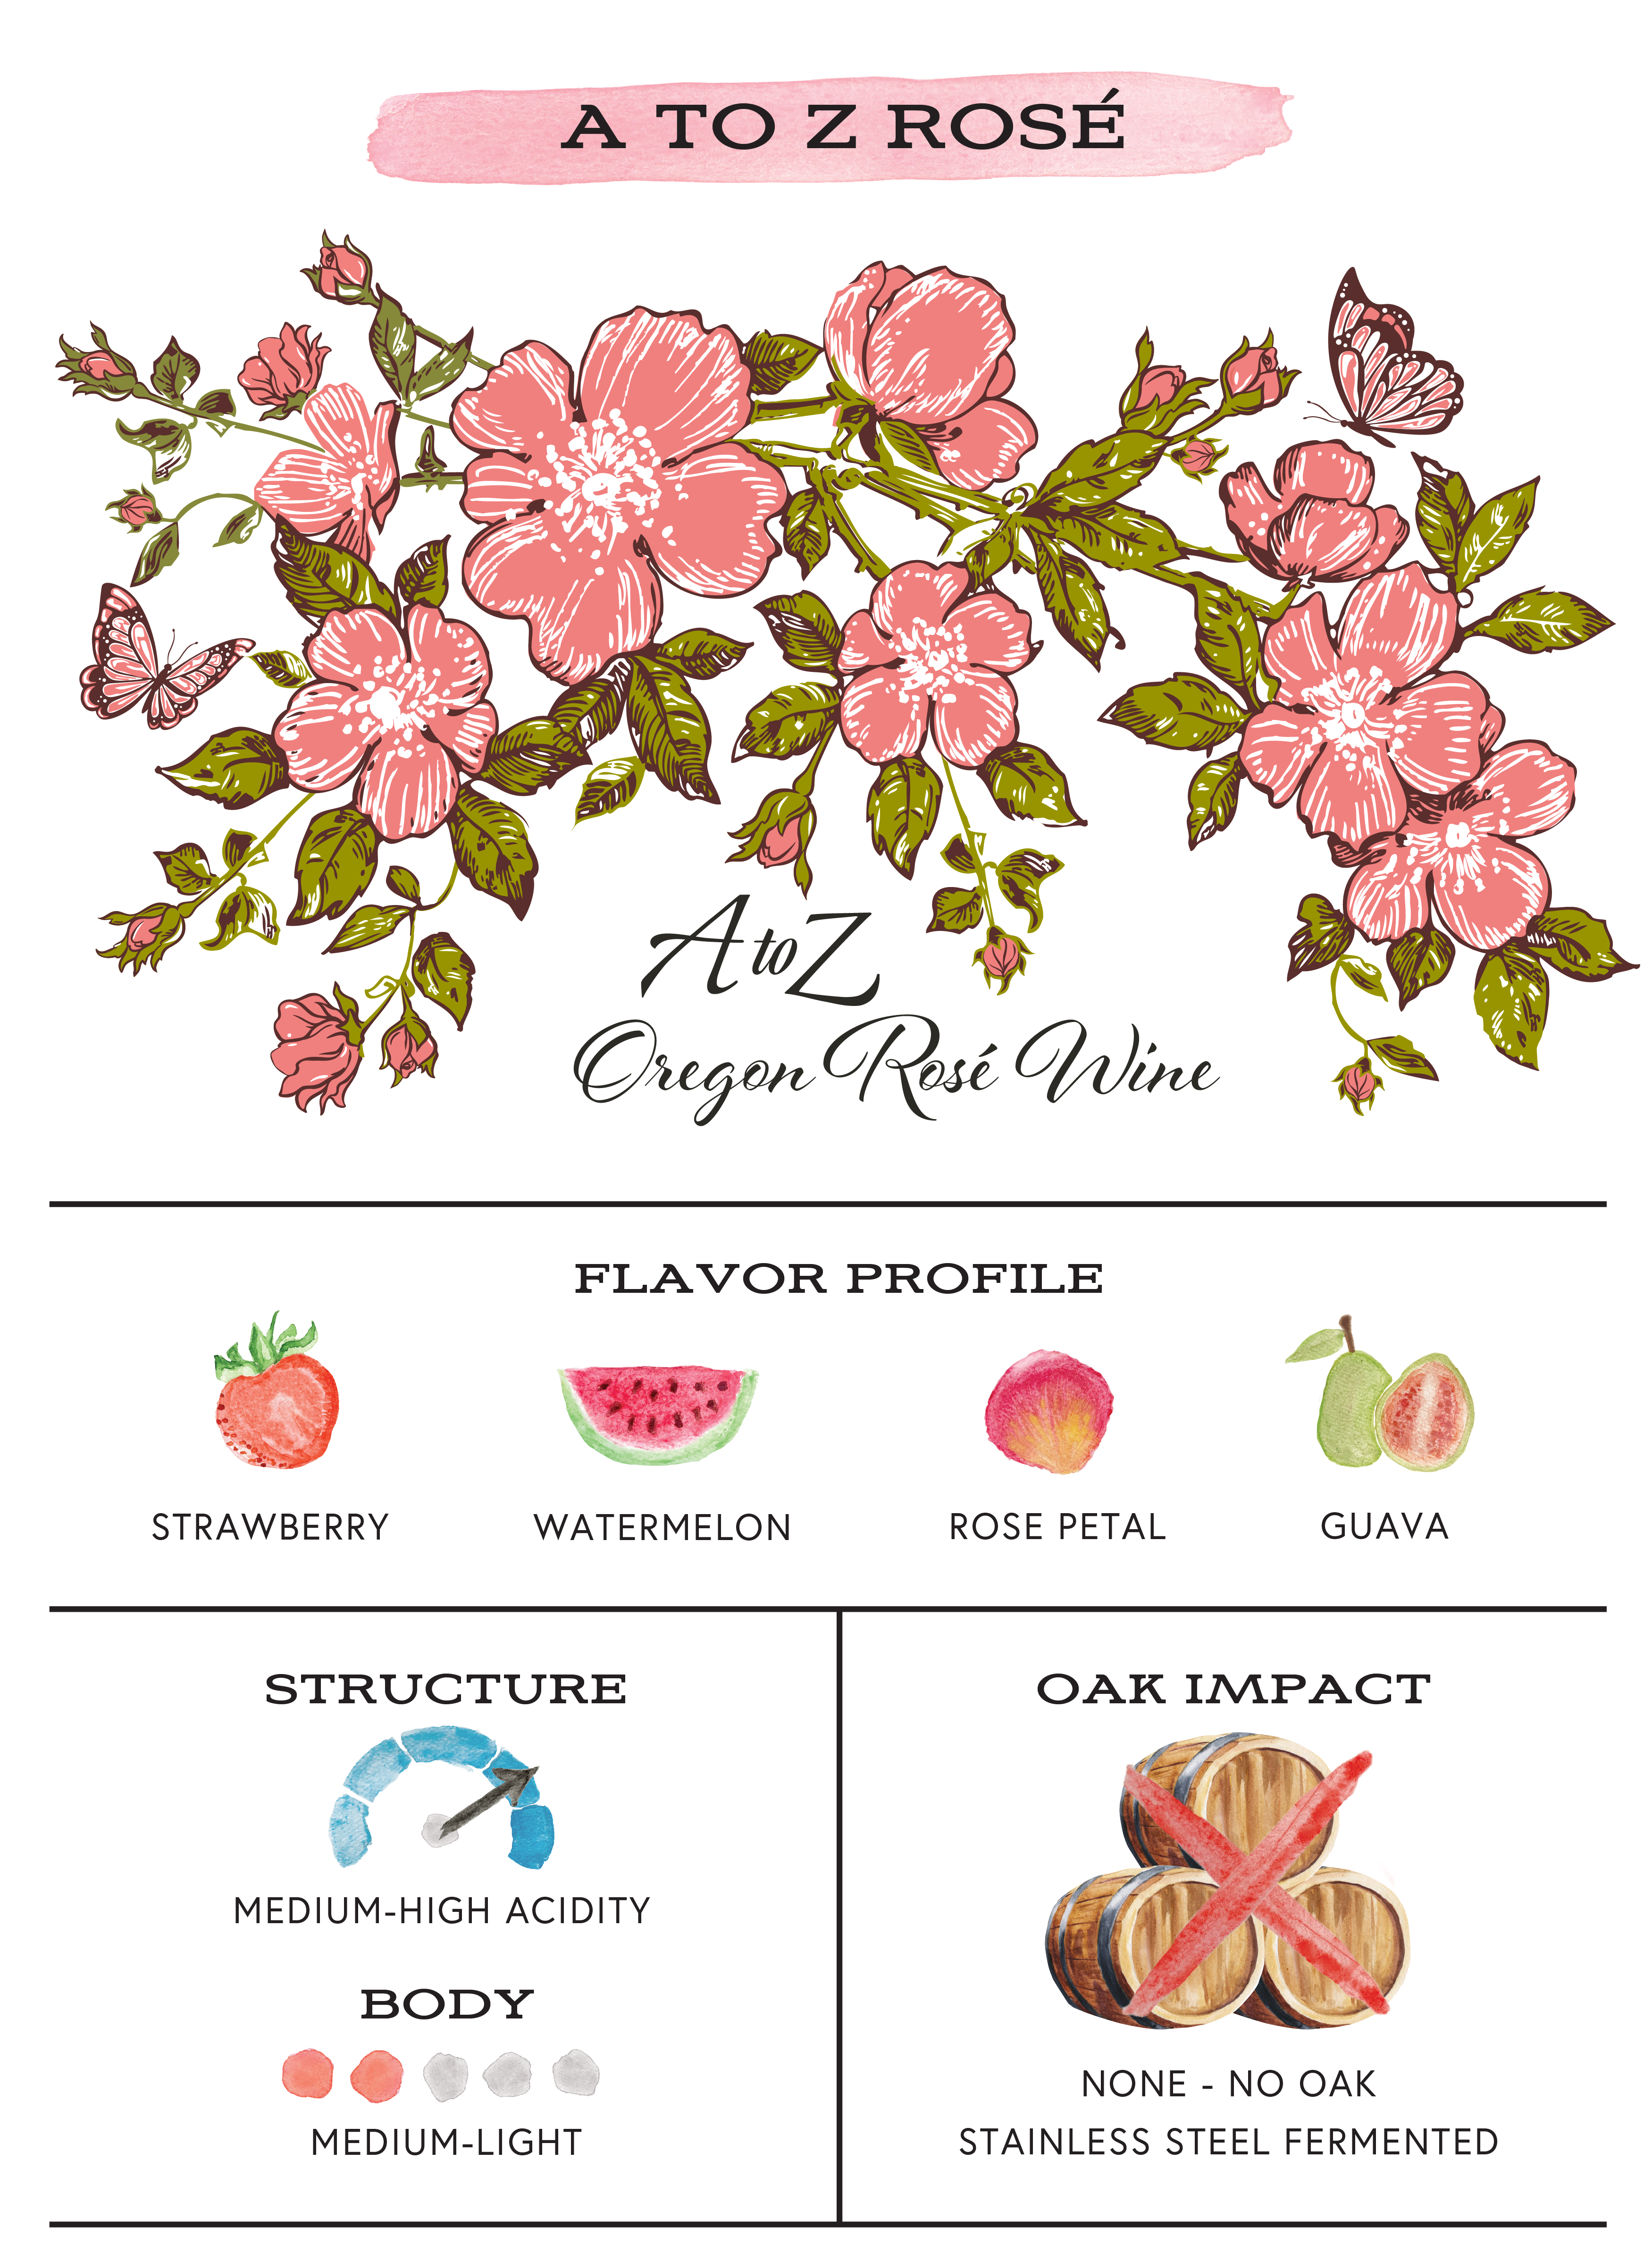 A to Z Rosé - to Oregon Exceptional of Quality | A Wineworks Z Wines